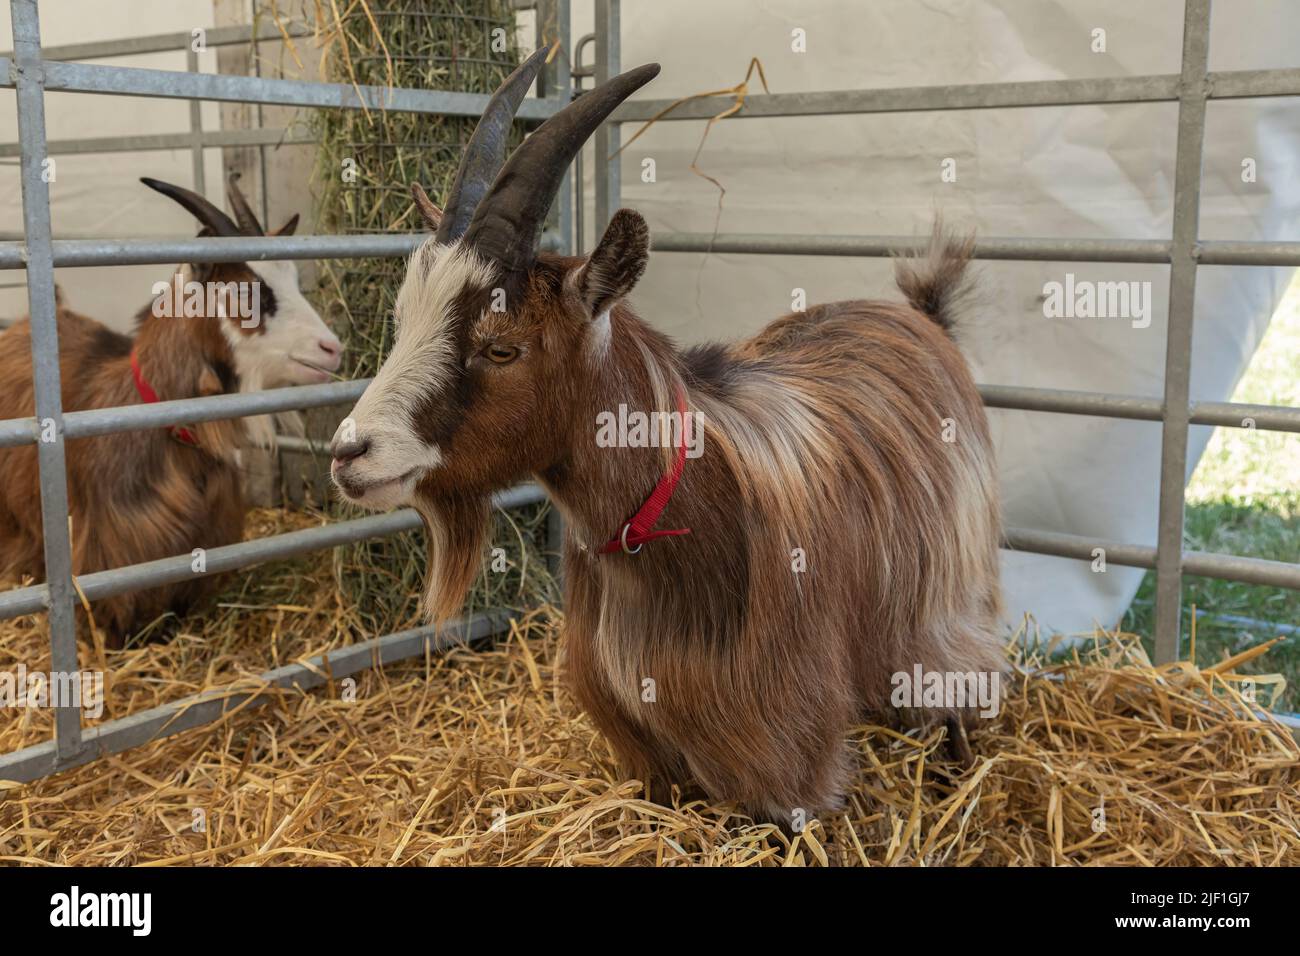 two long haired gaots in their pens wearing red colours and with white faces and small horns Stock Photo